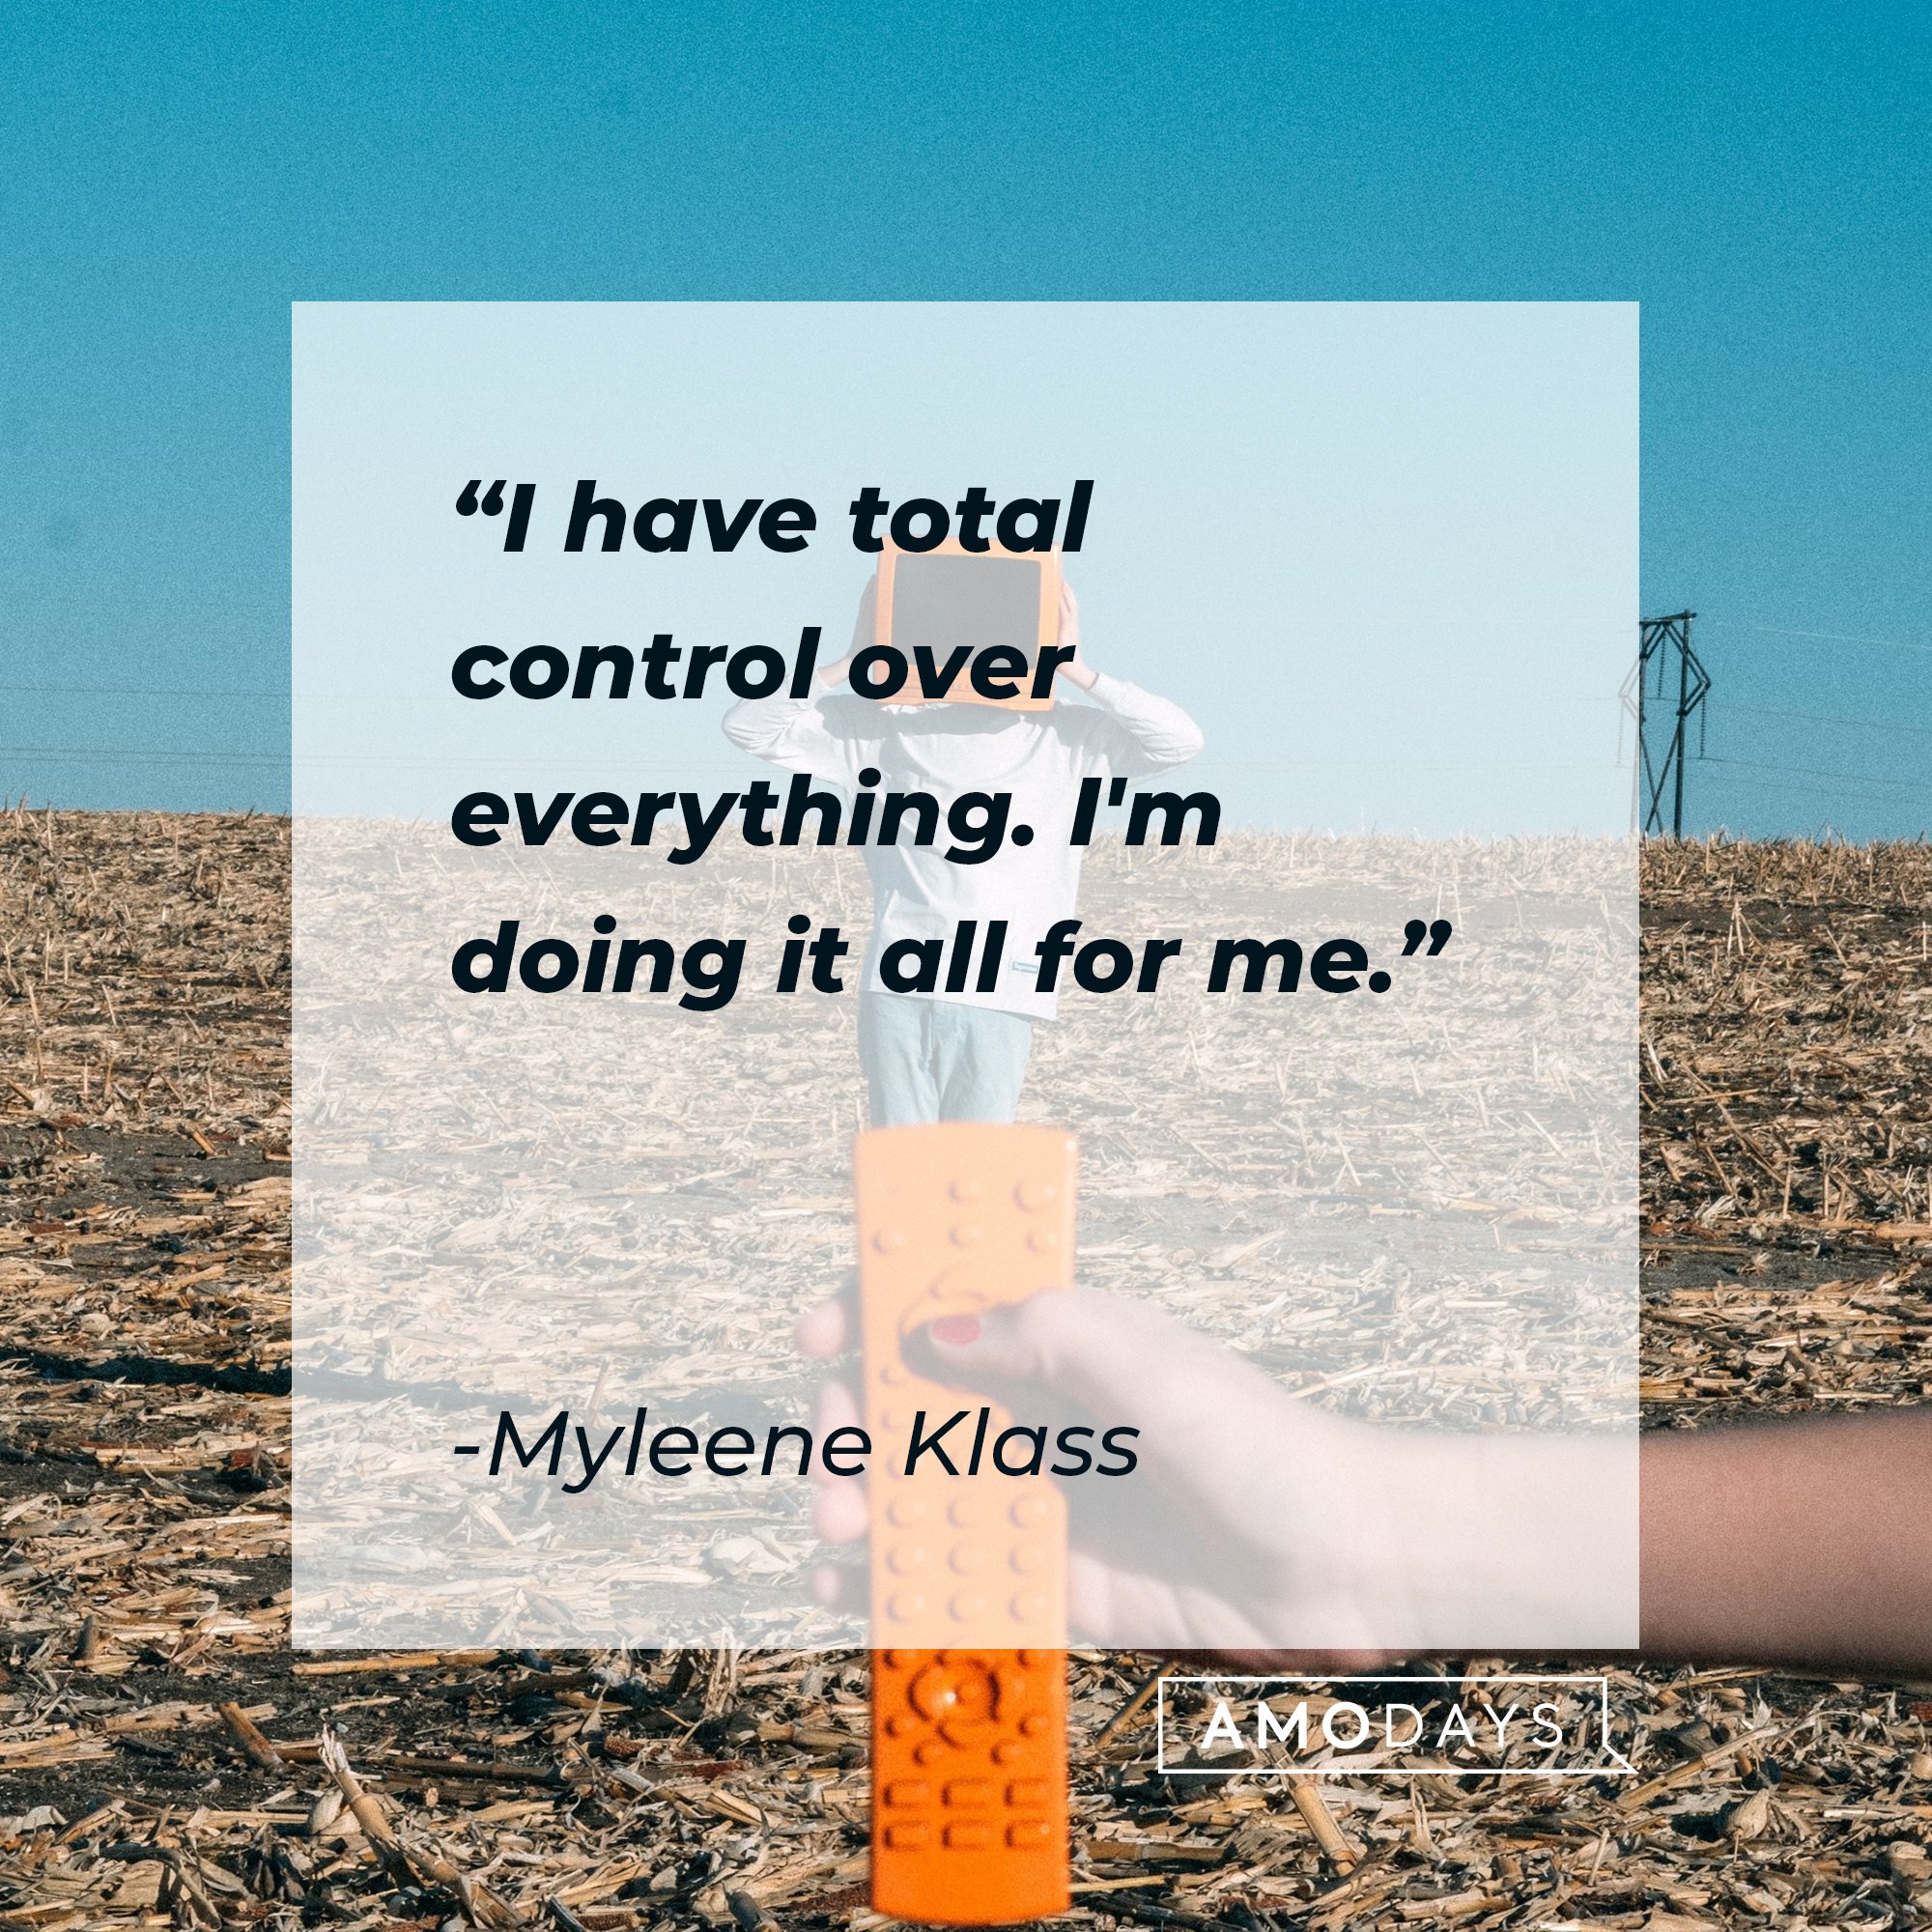 Myleene Klass’ "I have total control over everything. I'm doing it all for me." | Image: AmoDays 